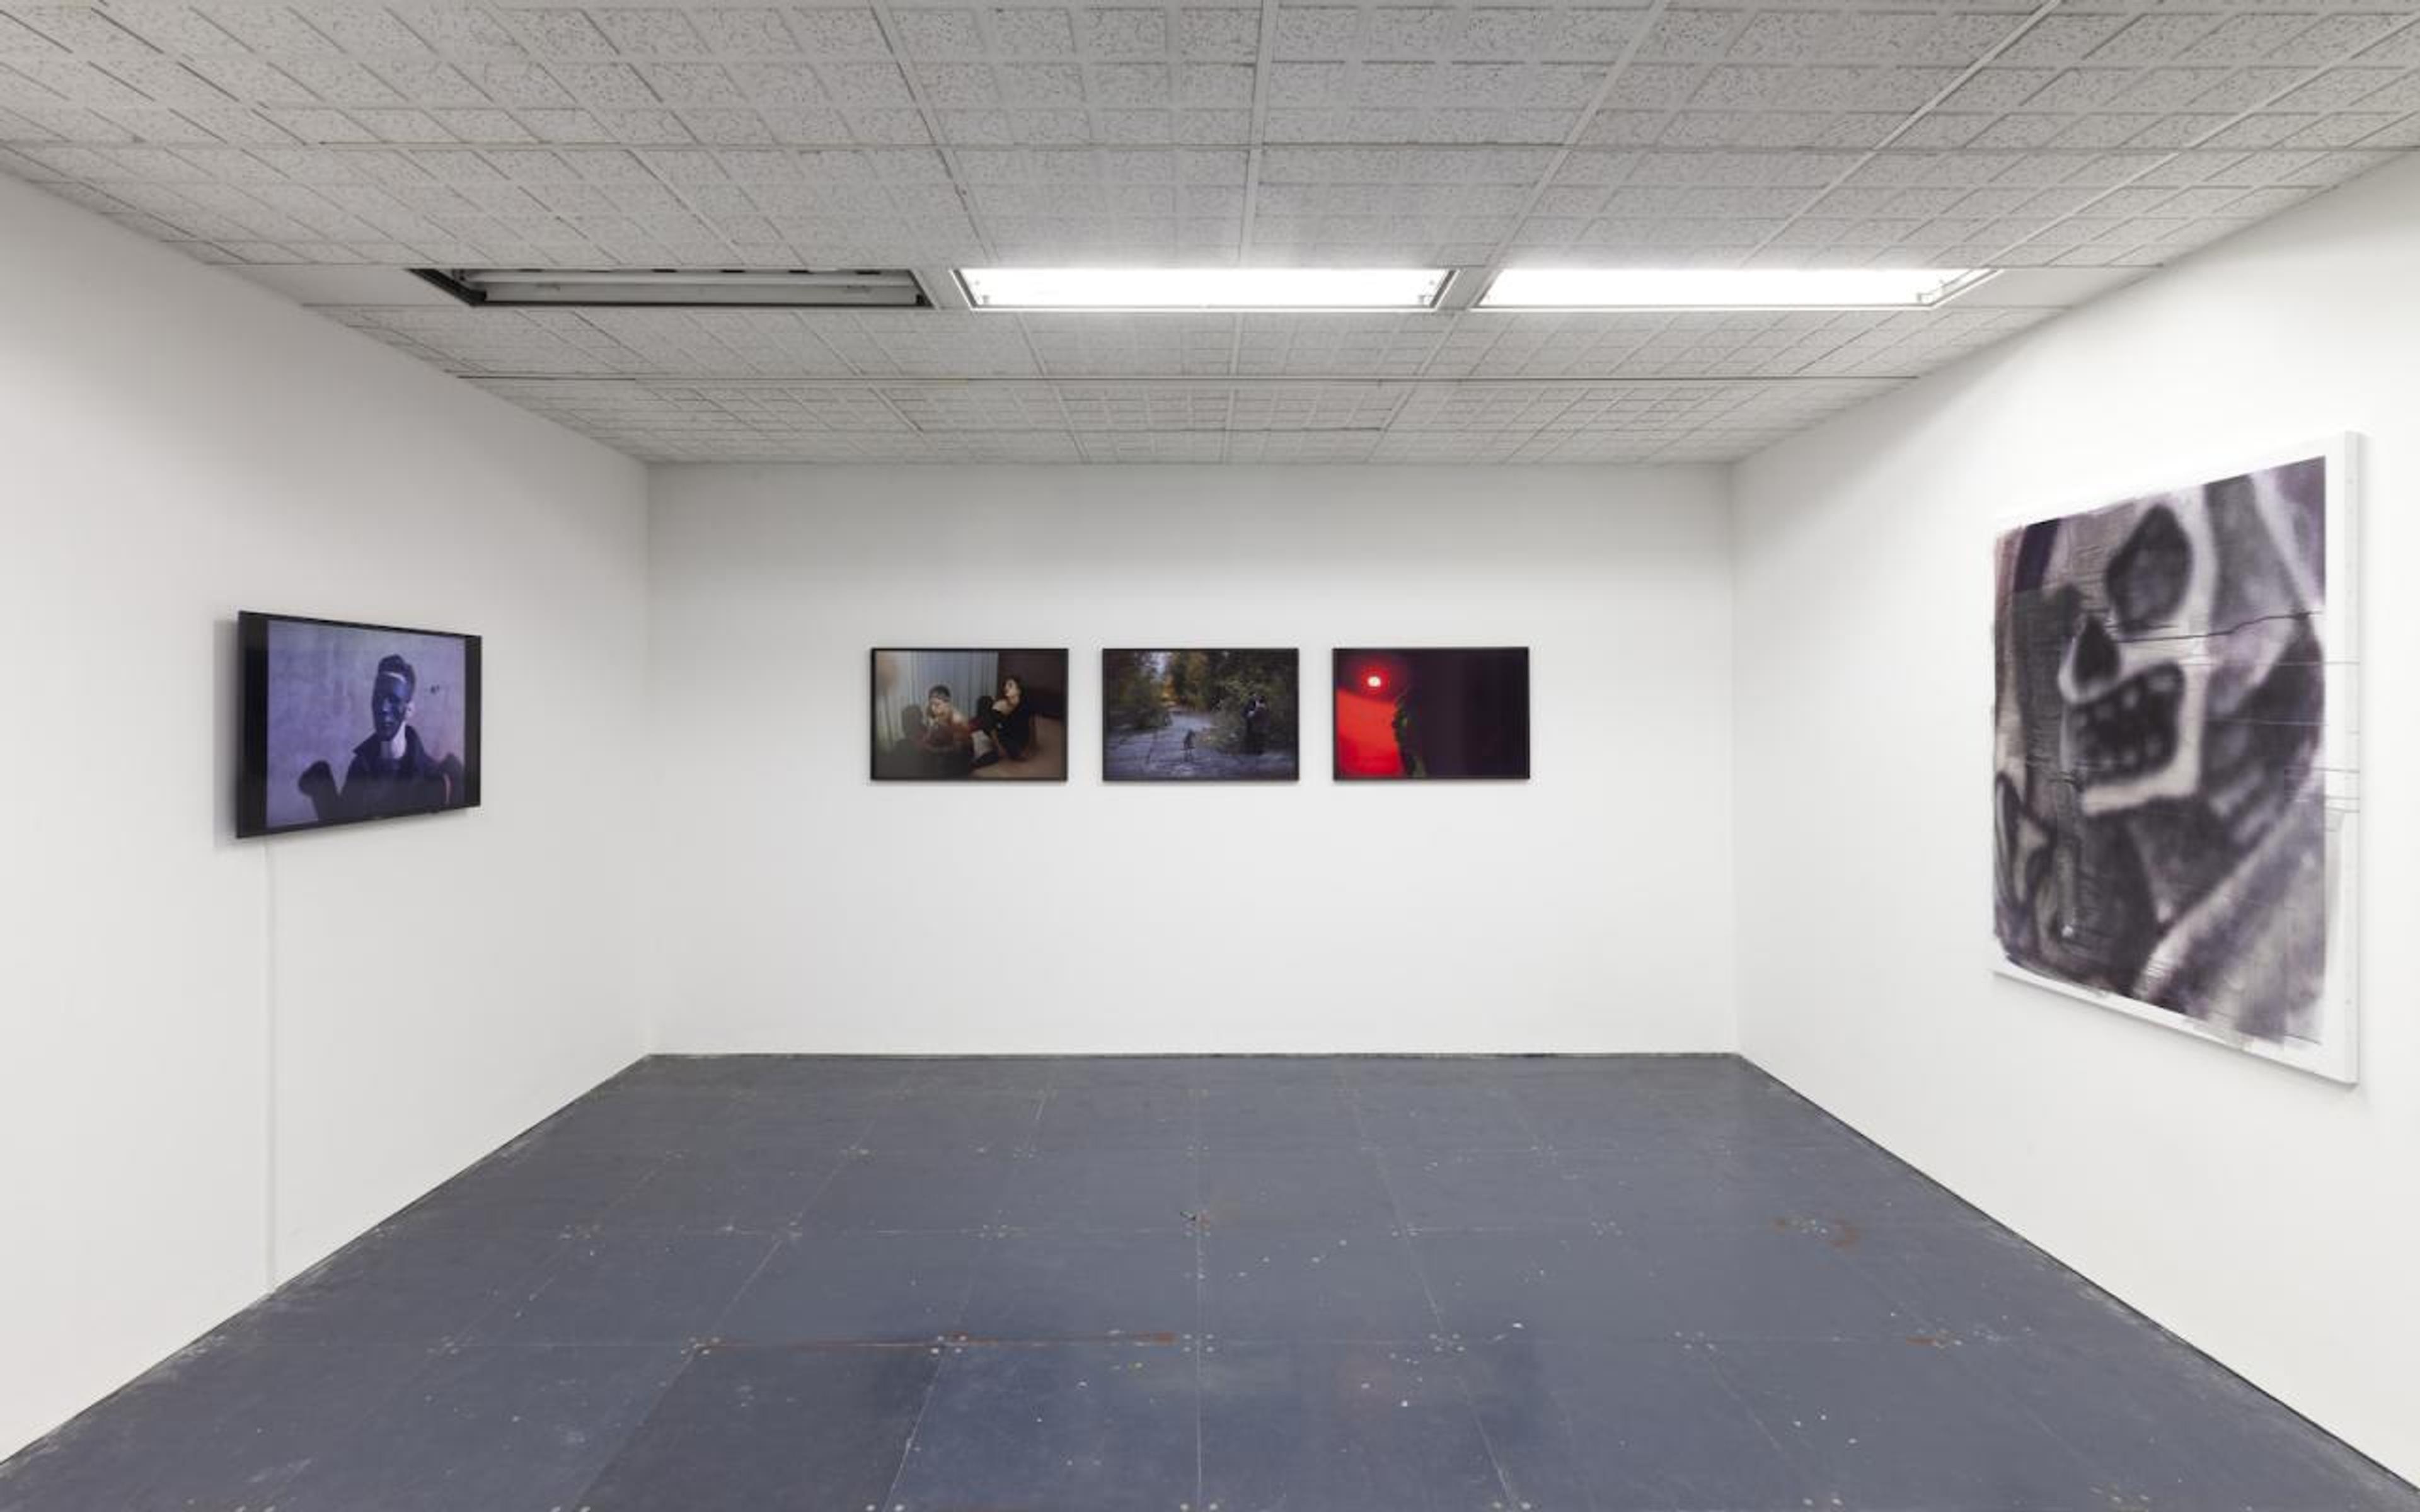 Exhibition view from Condo 2018 at Project Native Informant Courtesy of the artist and Project Native Informant, London MadeIn Gallery (Shanghai) and KOW (Berlin) hosted by Project Native Informant